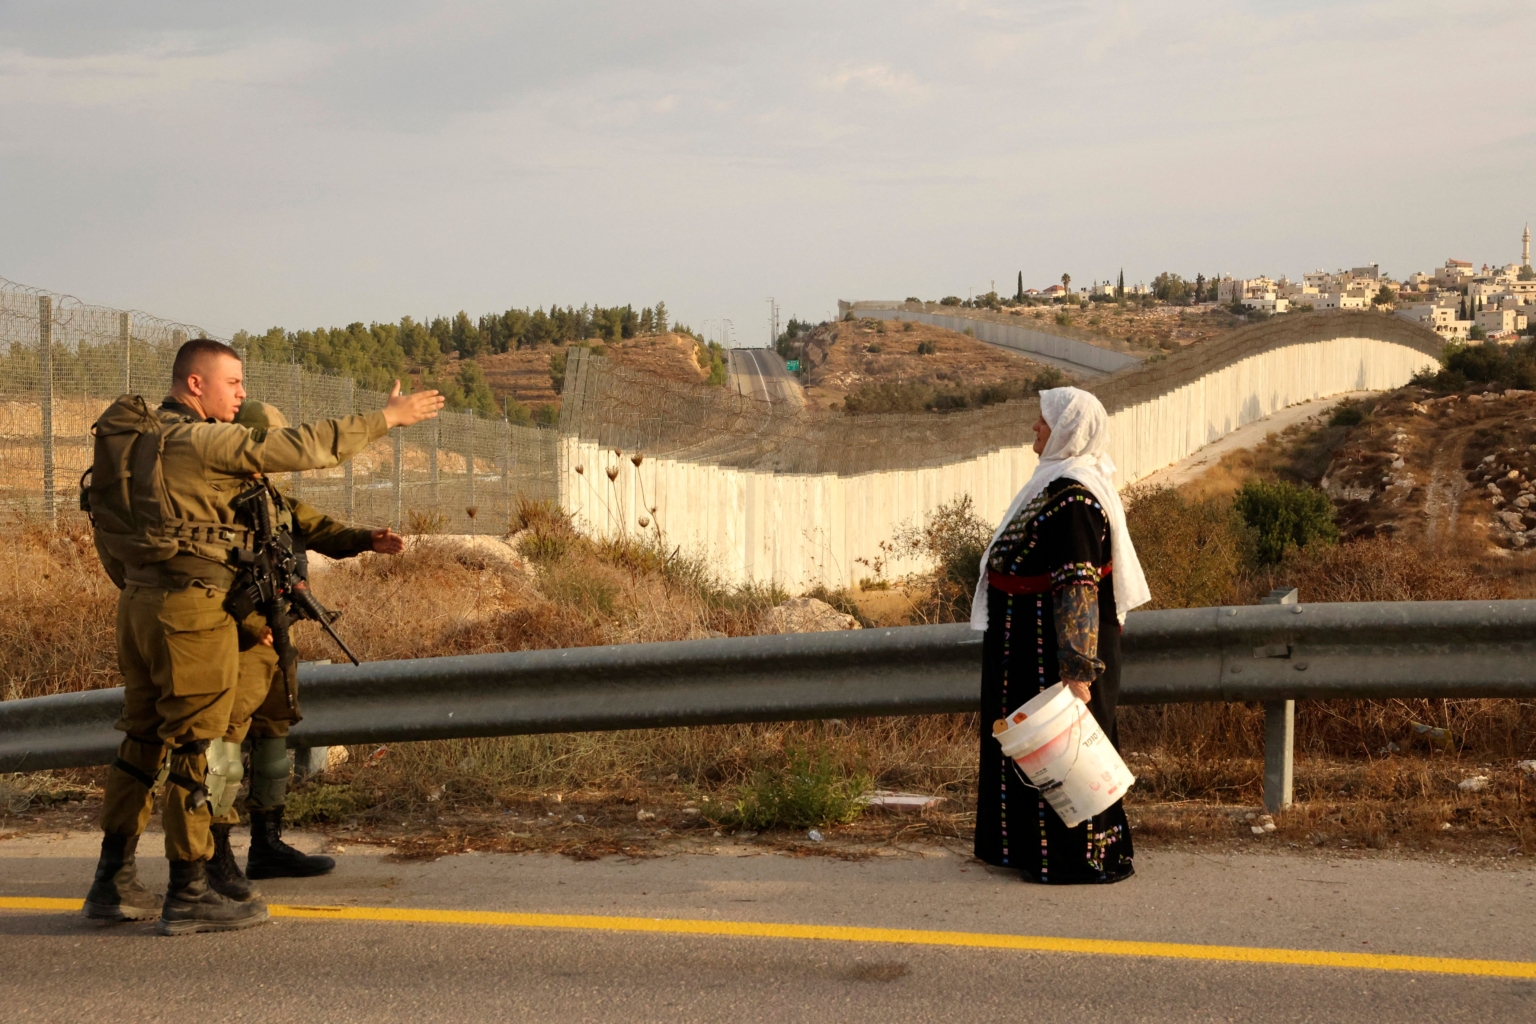 State-backed deadly rampage by Israeli settlers underscores urgent need to dismantle apartheid